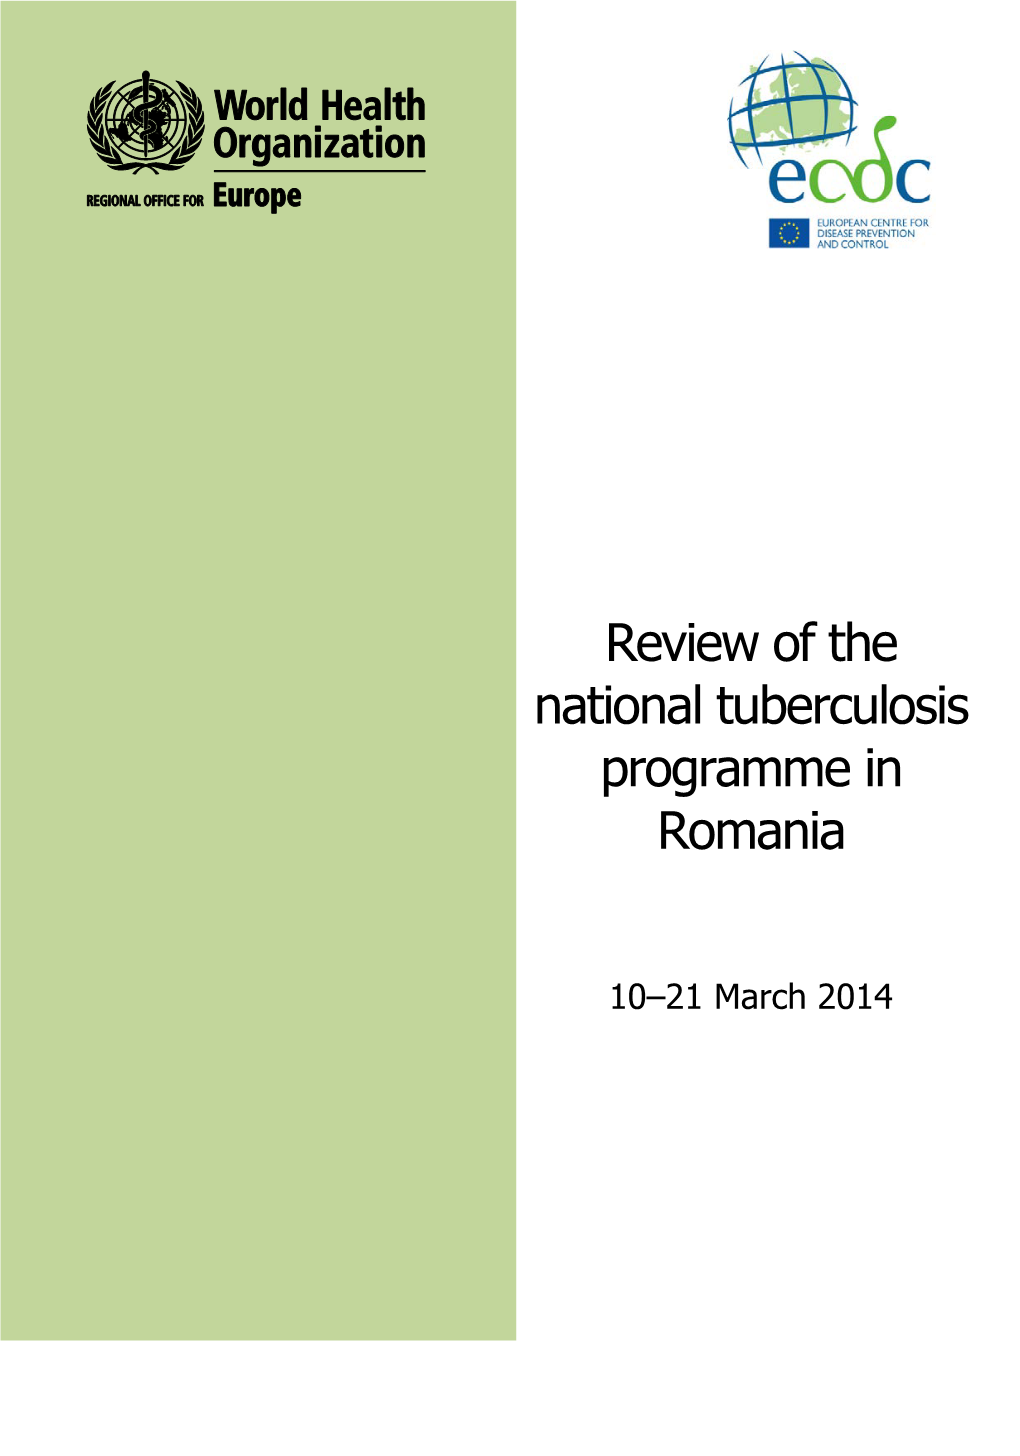 Review of the National Tuberculosis Programme in Romania, 10–21 March 2014